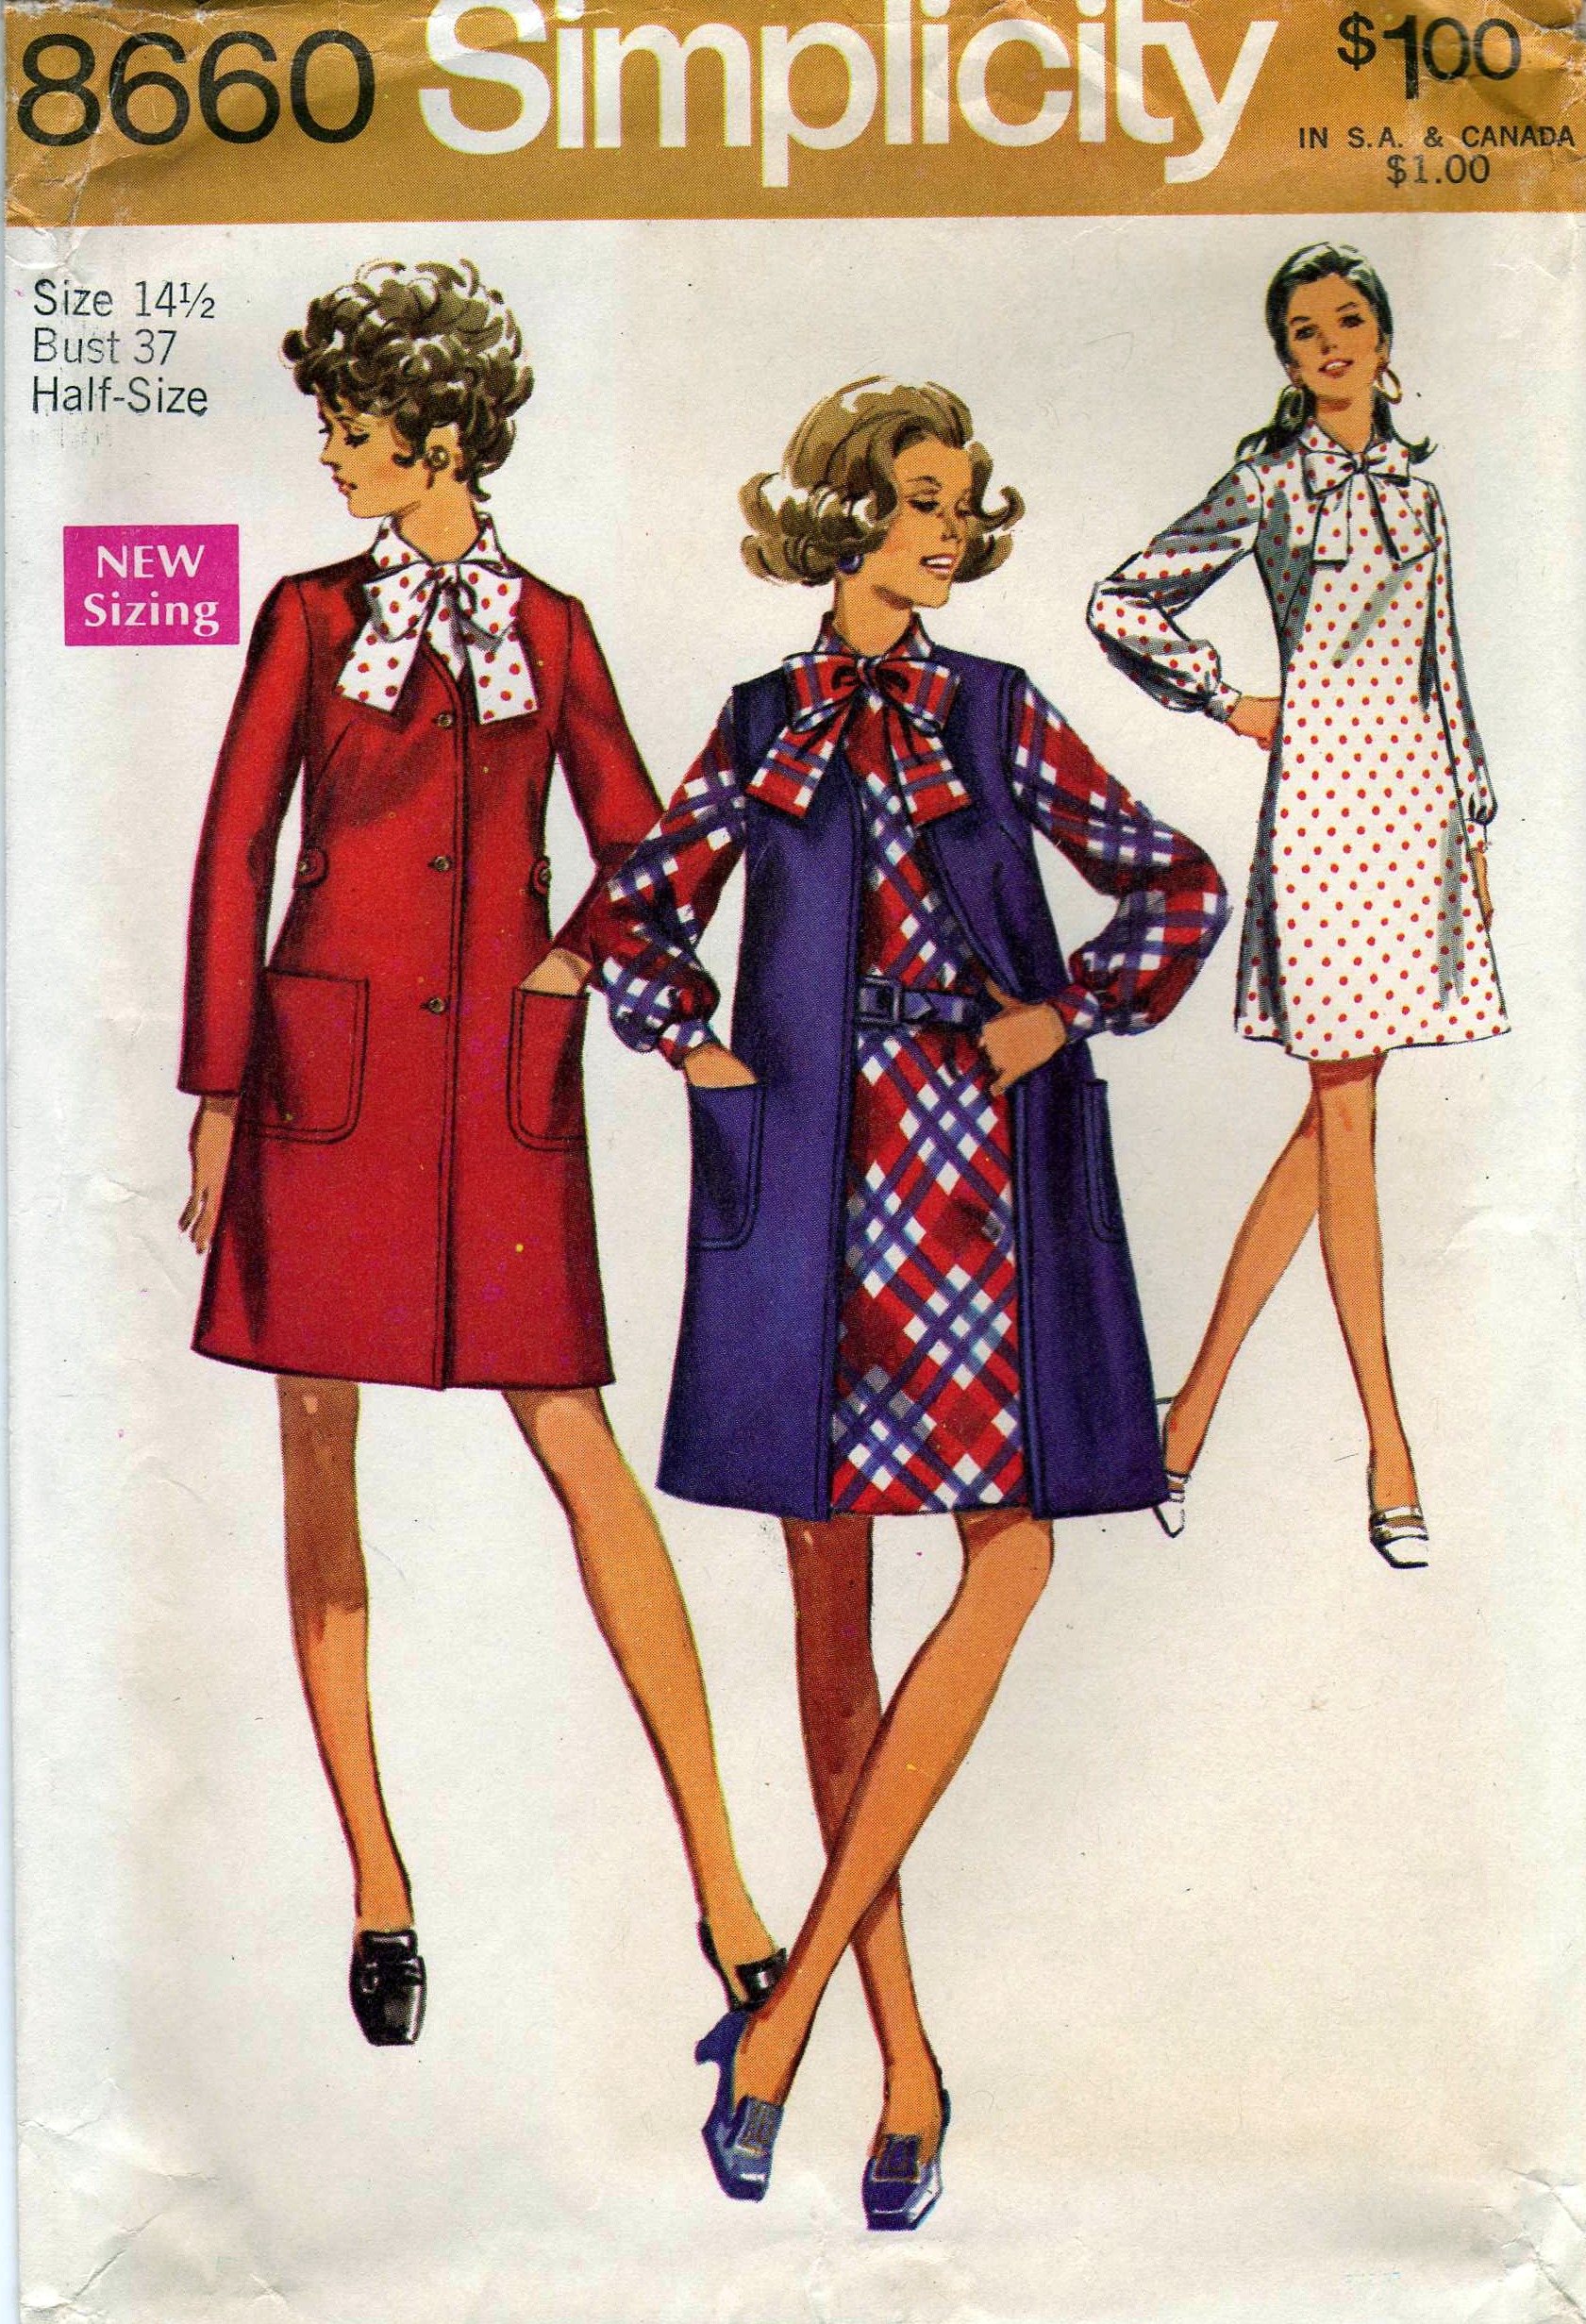 Simplicity 8660 | Vintage Sewing Patterns | FANDOM powered by Wikia